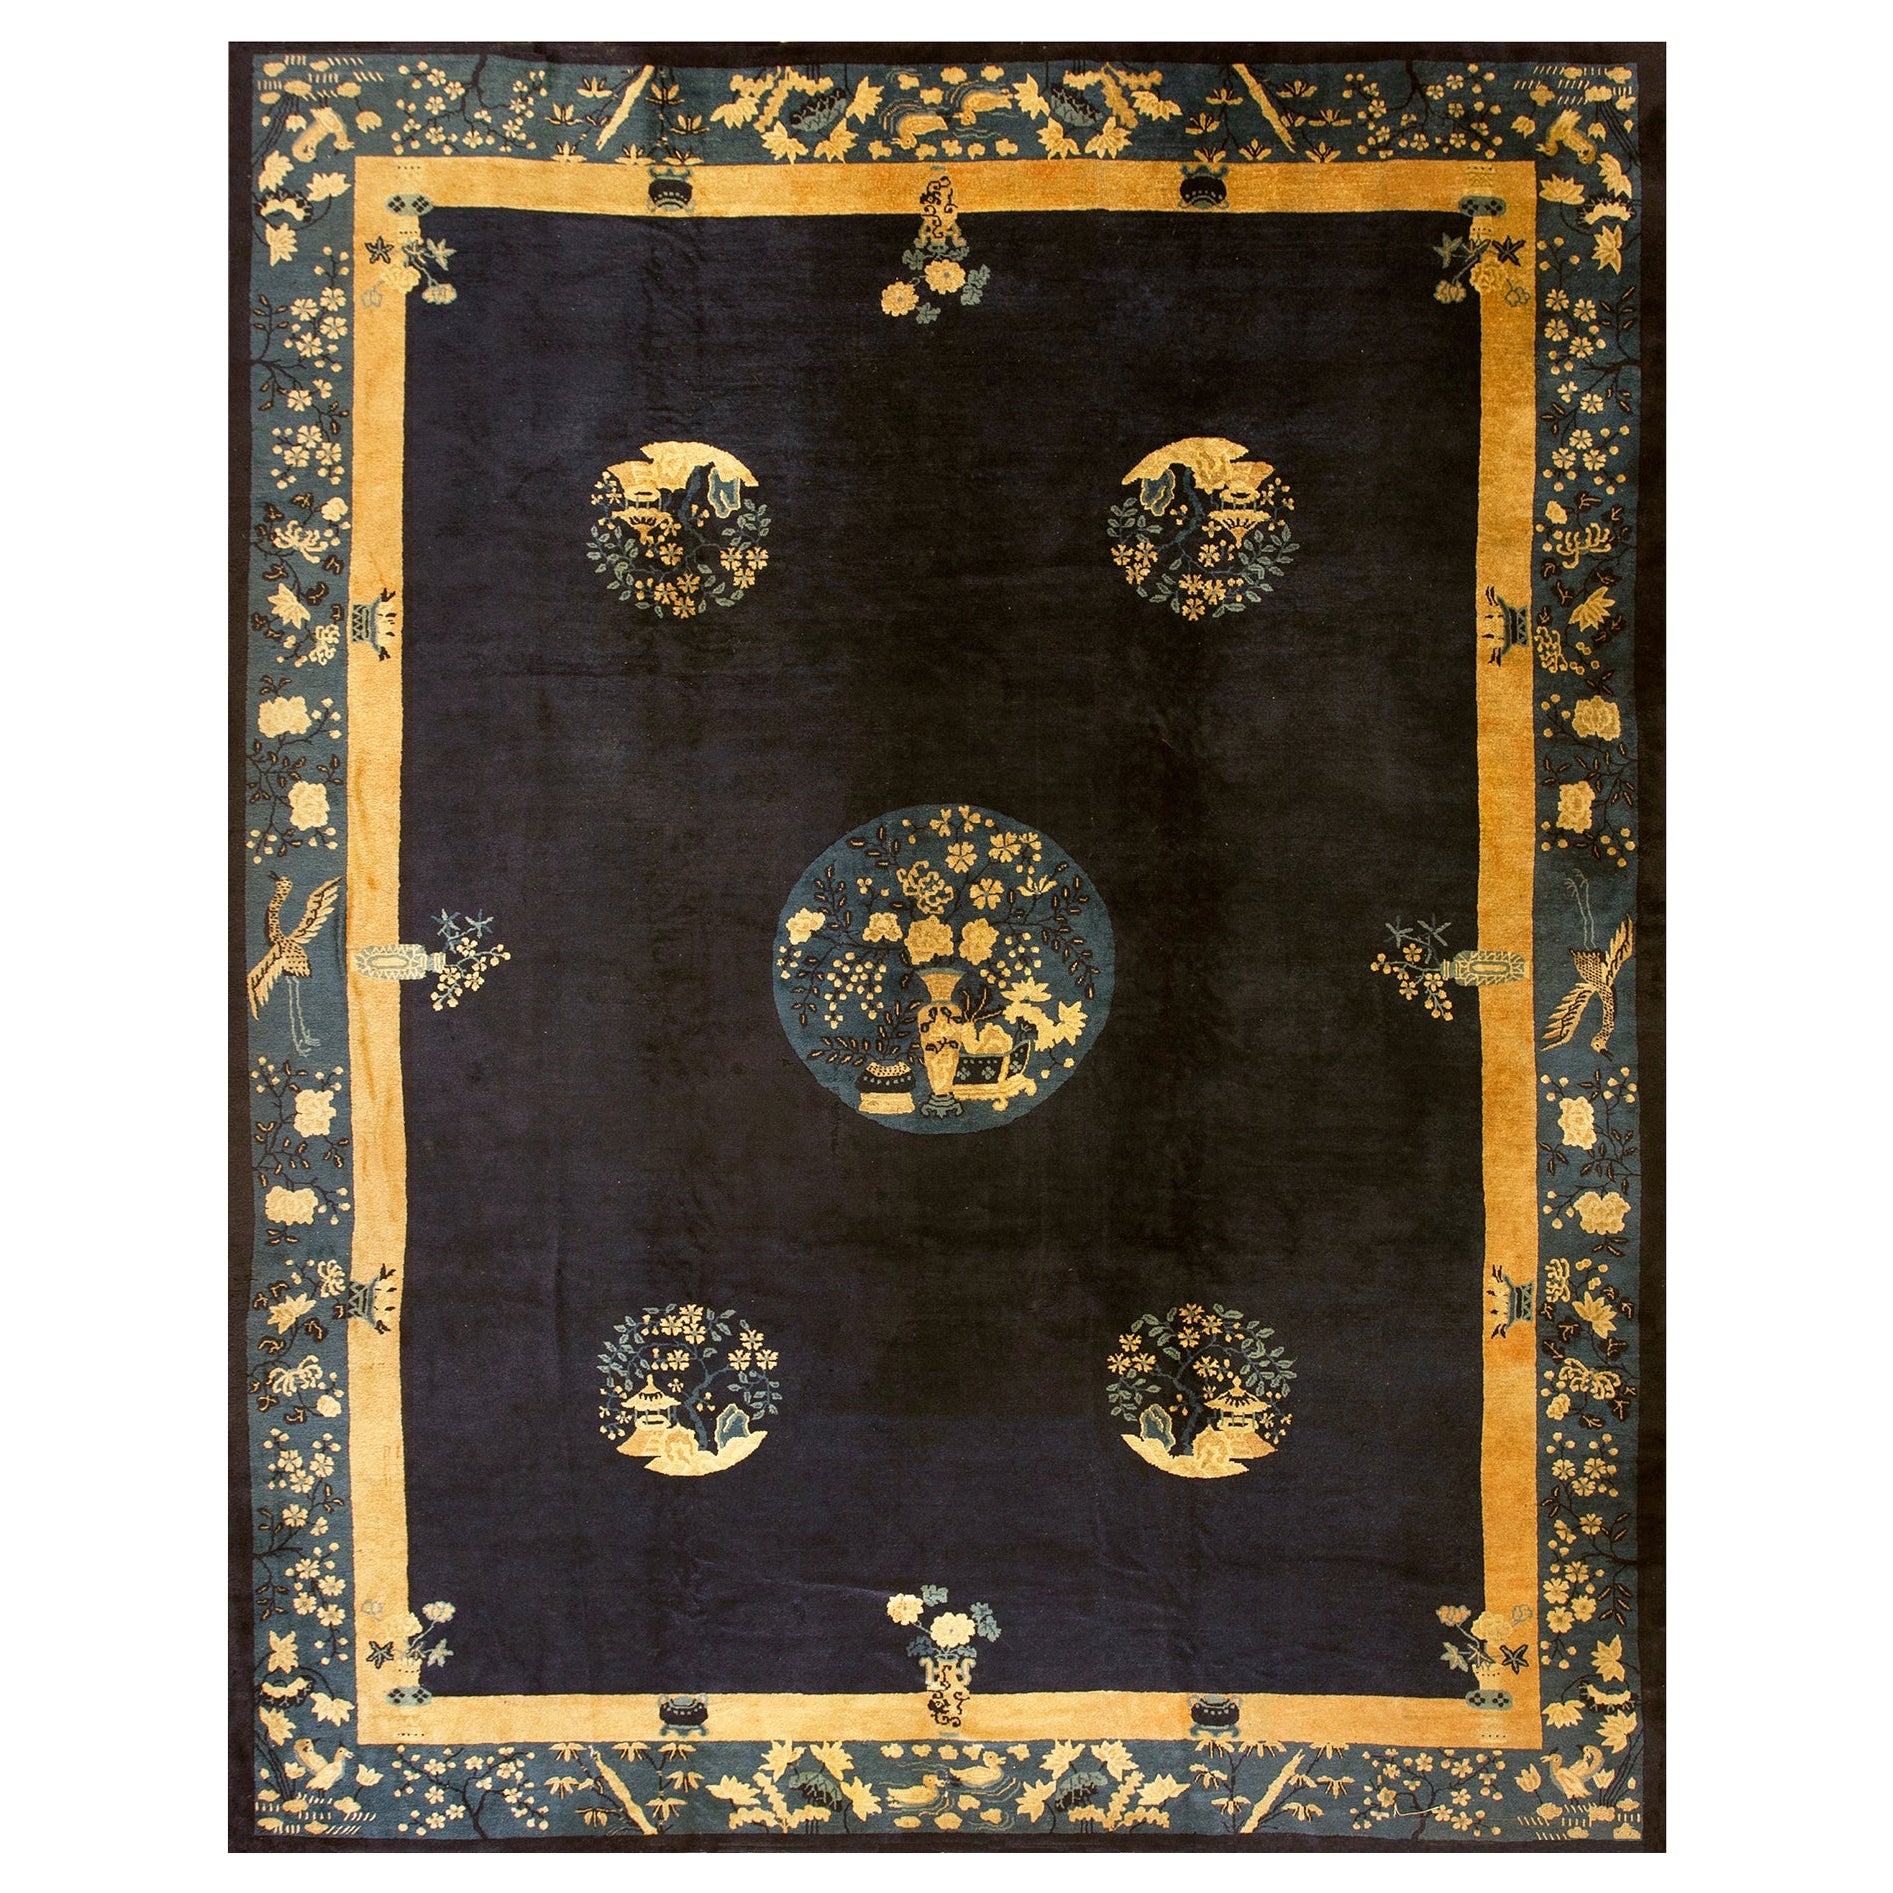 Early 20th Century Chinese Peking Carpet ( 10' x 12' 6" - 305 x 382 ) For Sale